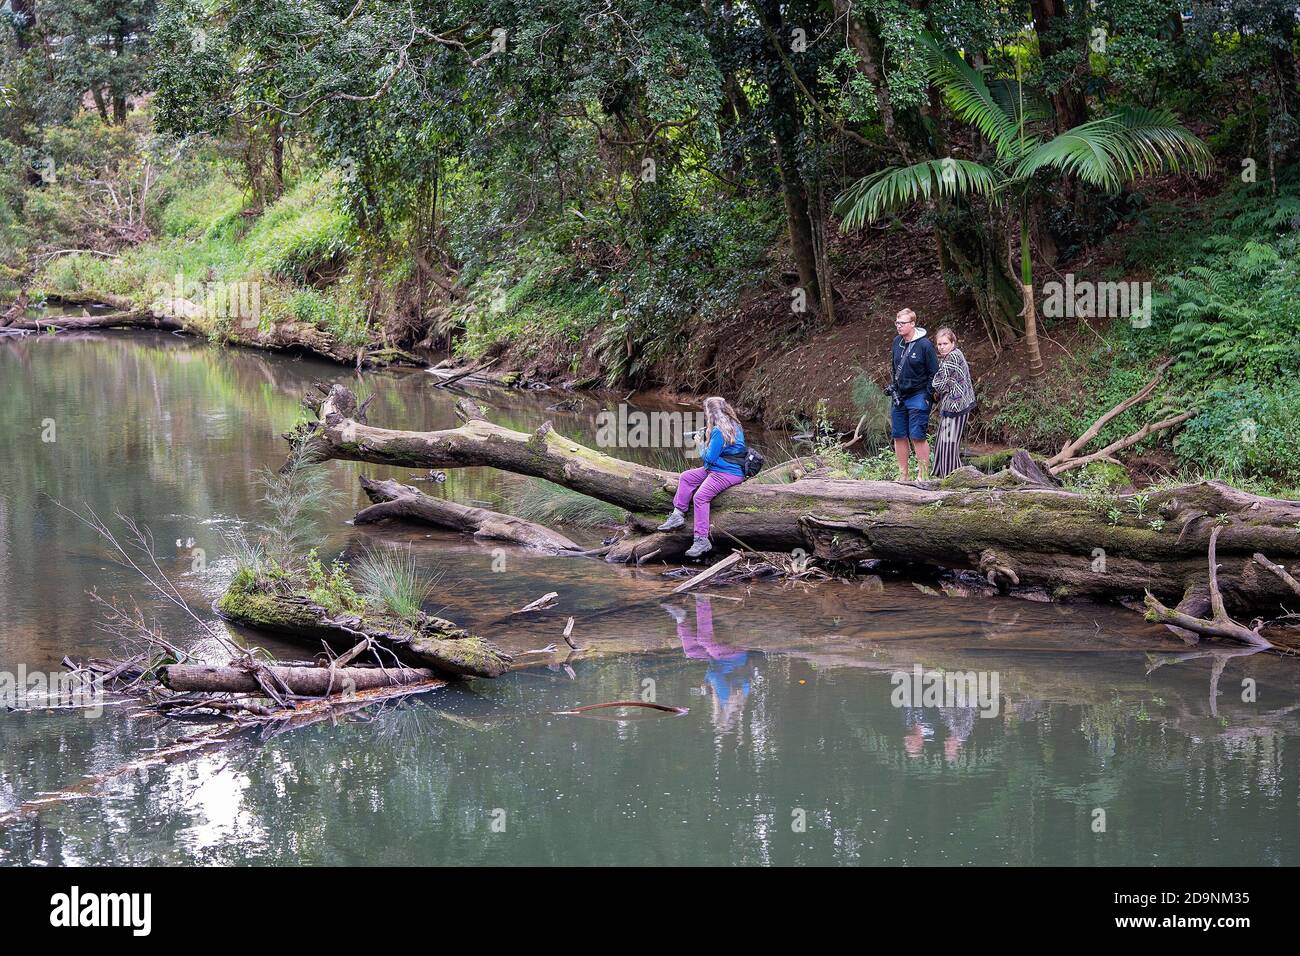 Mackay, Australia - August 25th 2019: A female photographer sitting on a log in Broken River at Eungella National Park waiting for platypus to appear, Stock Photo